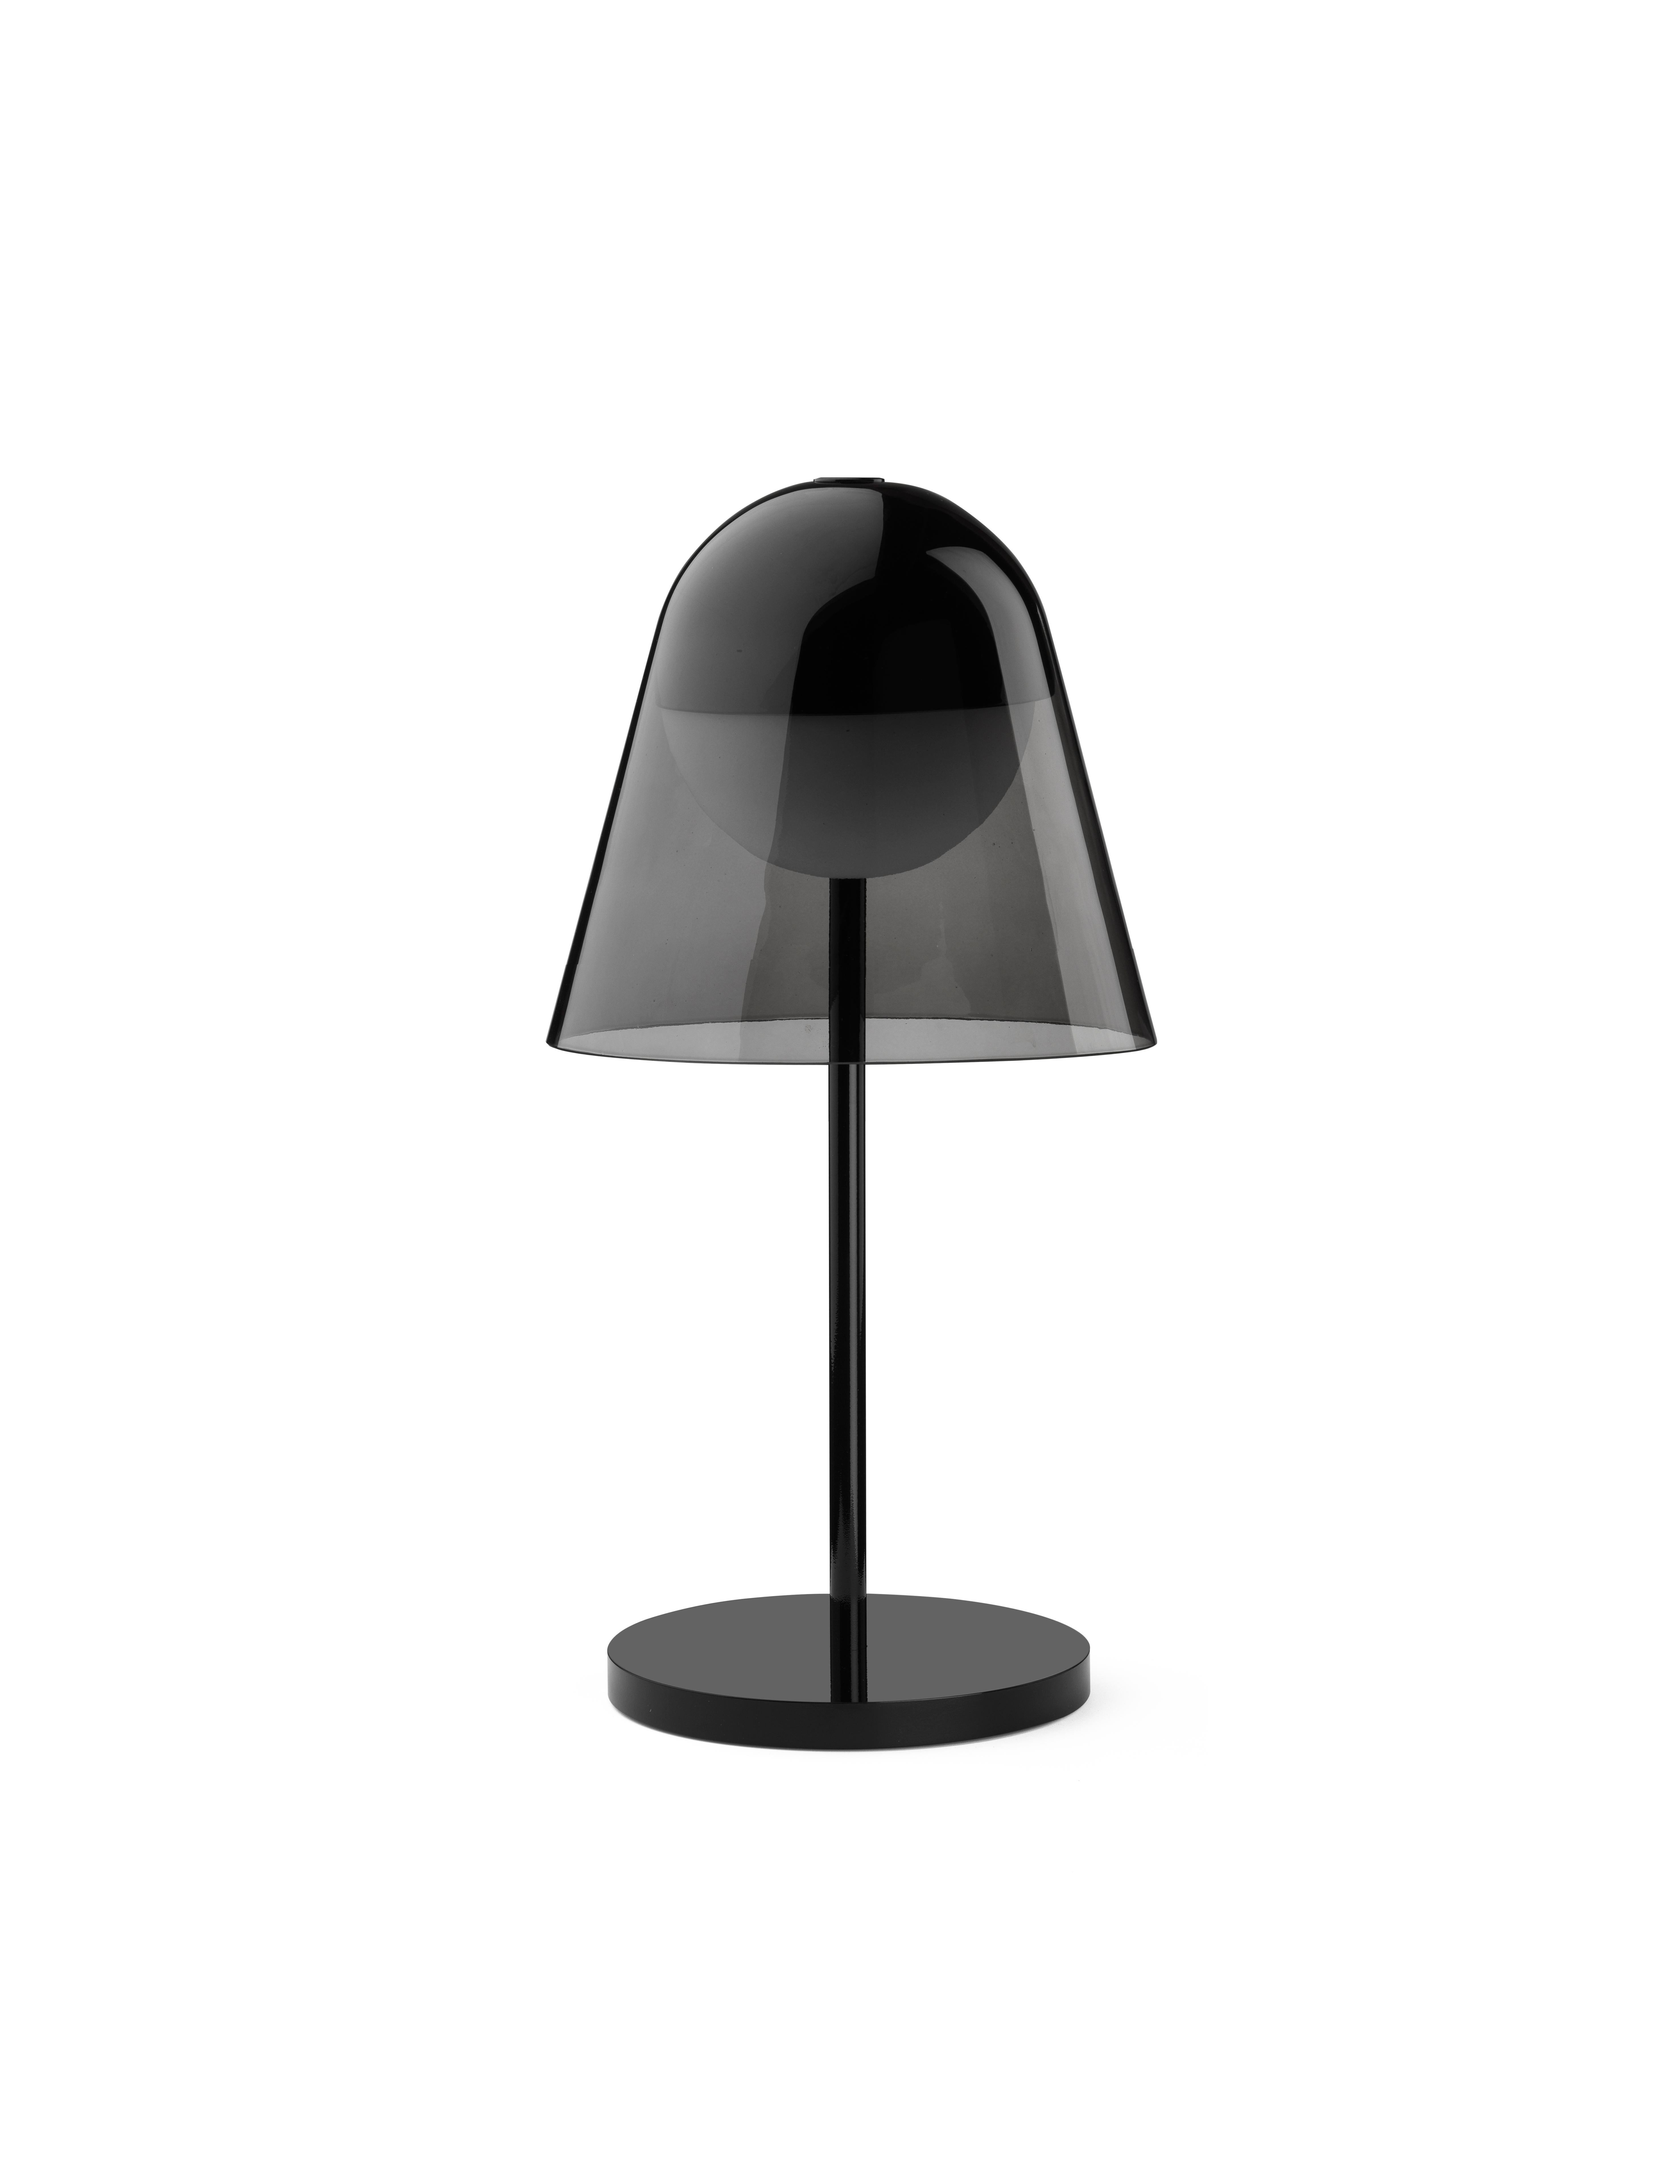 Helios Table Lamp, Smoked Glass and Black Structure, Made in Italy In New Condition For Sale In Villa Carcina, IT